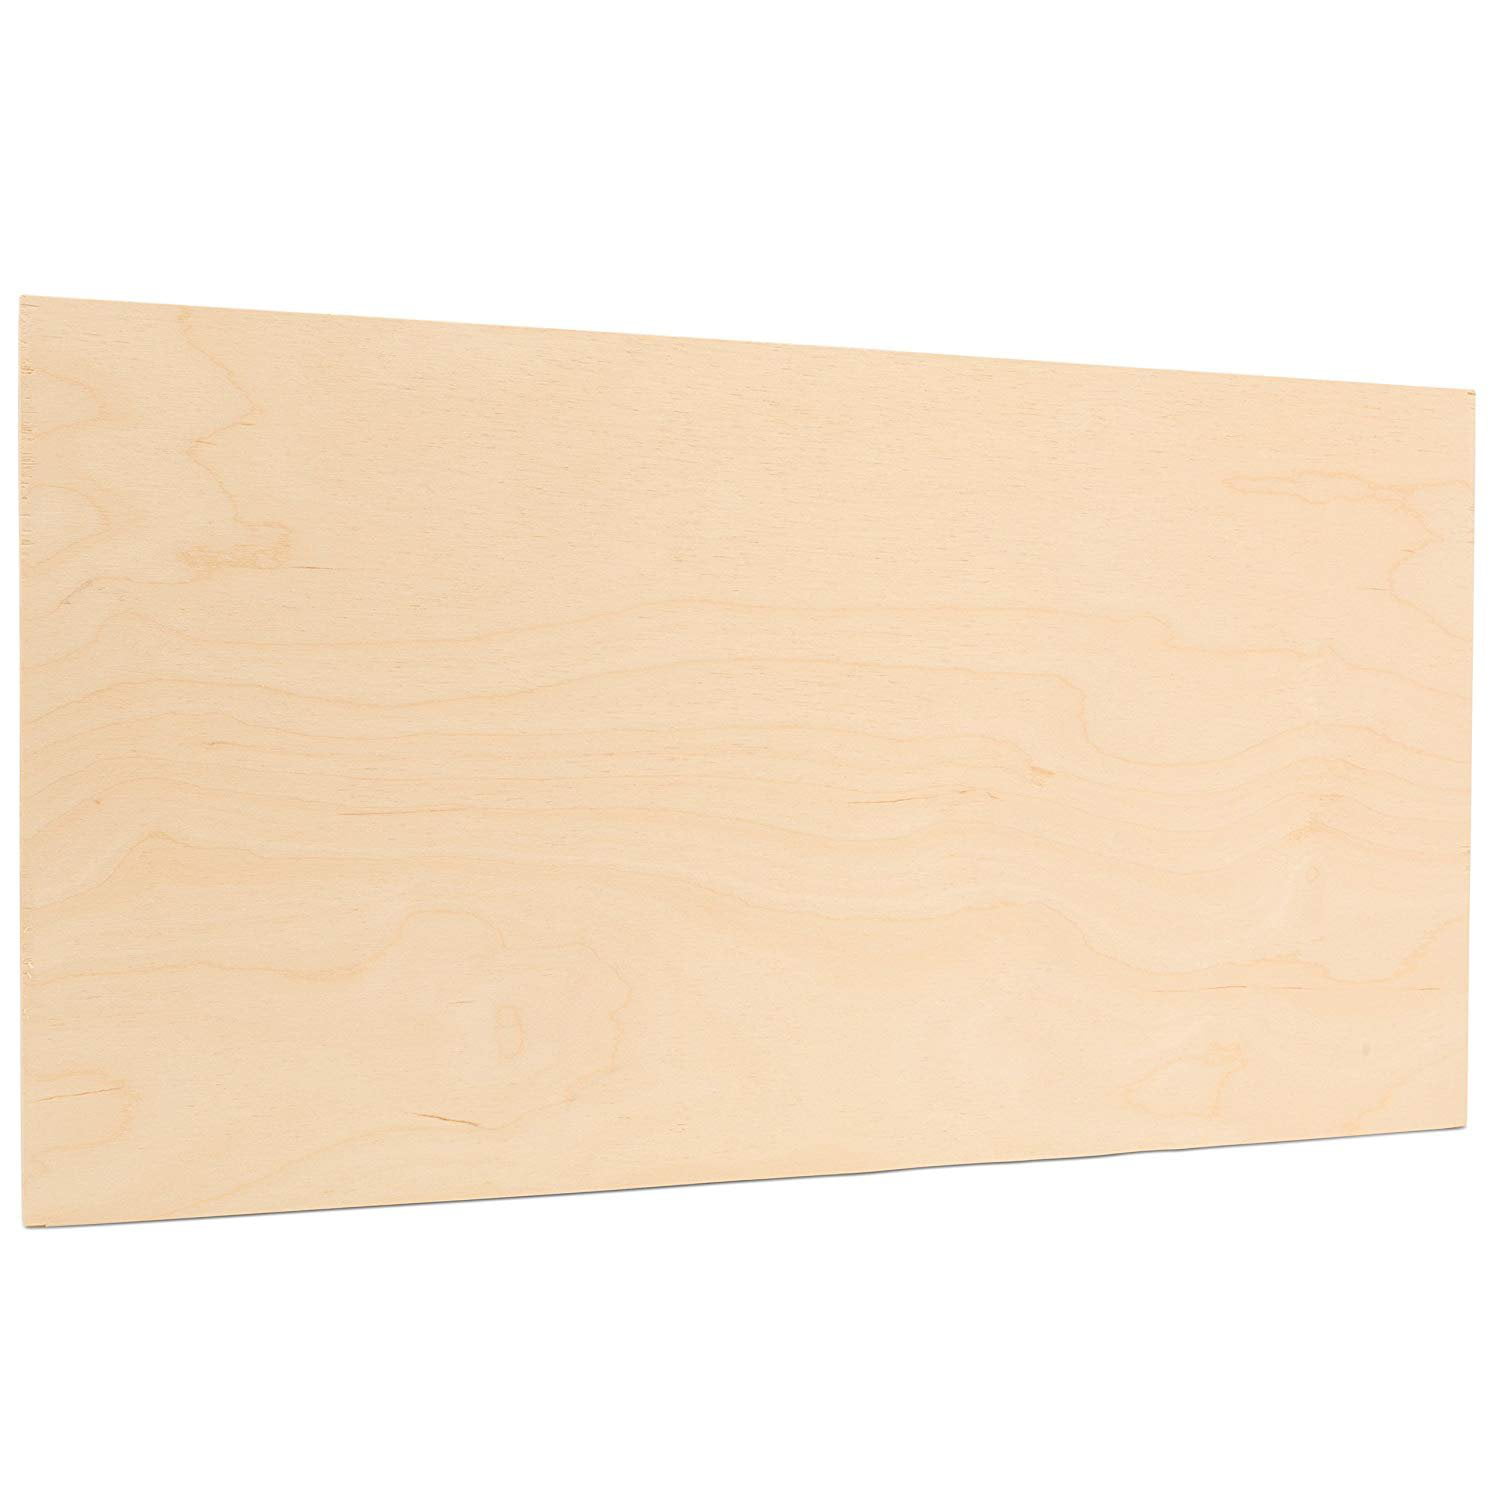 3mm 1/8 x 12 x 20 Inch Premium Baltic Birch Plywood B/BB Grade Pack of 20 Flat Sheets by Woodpeckers